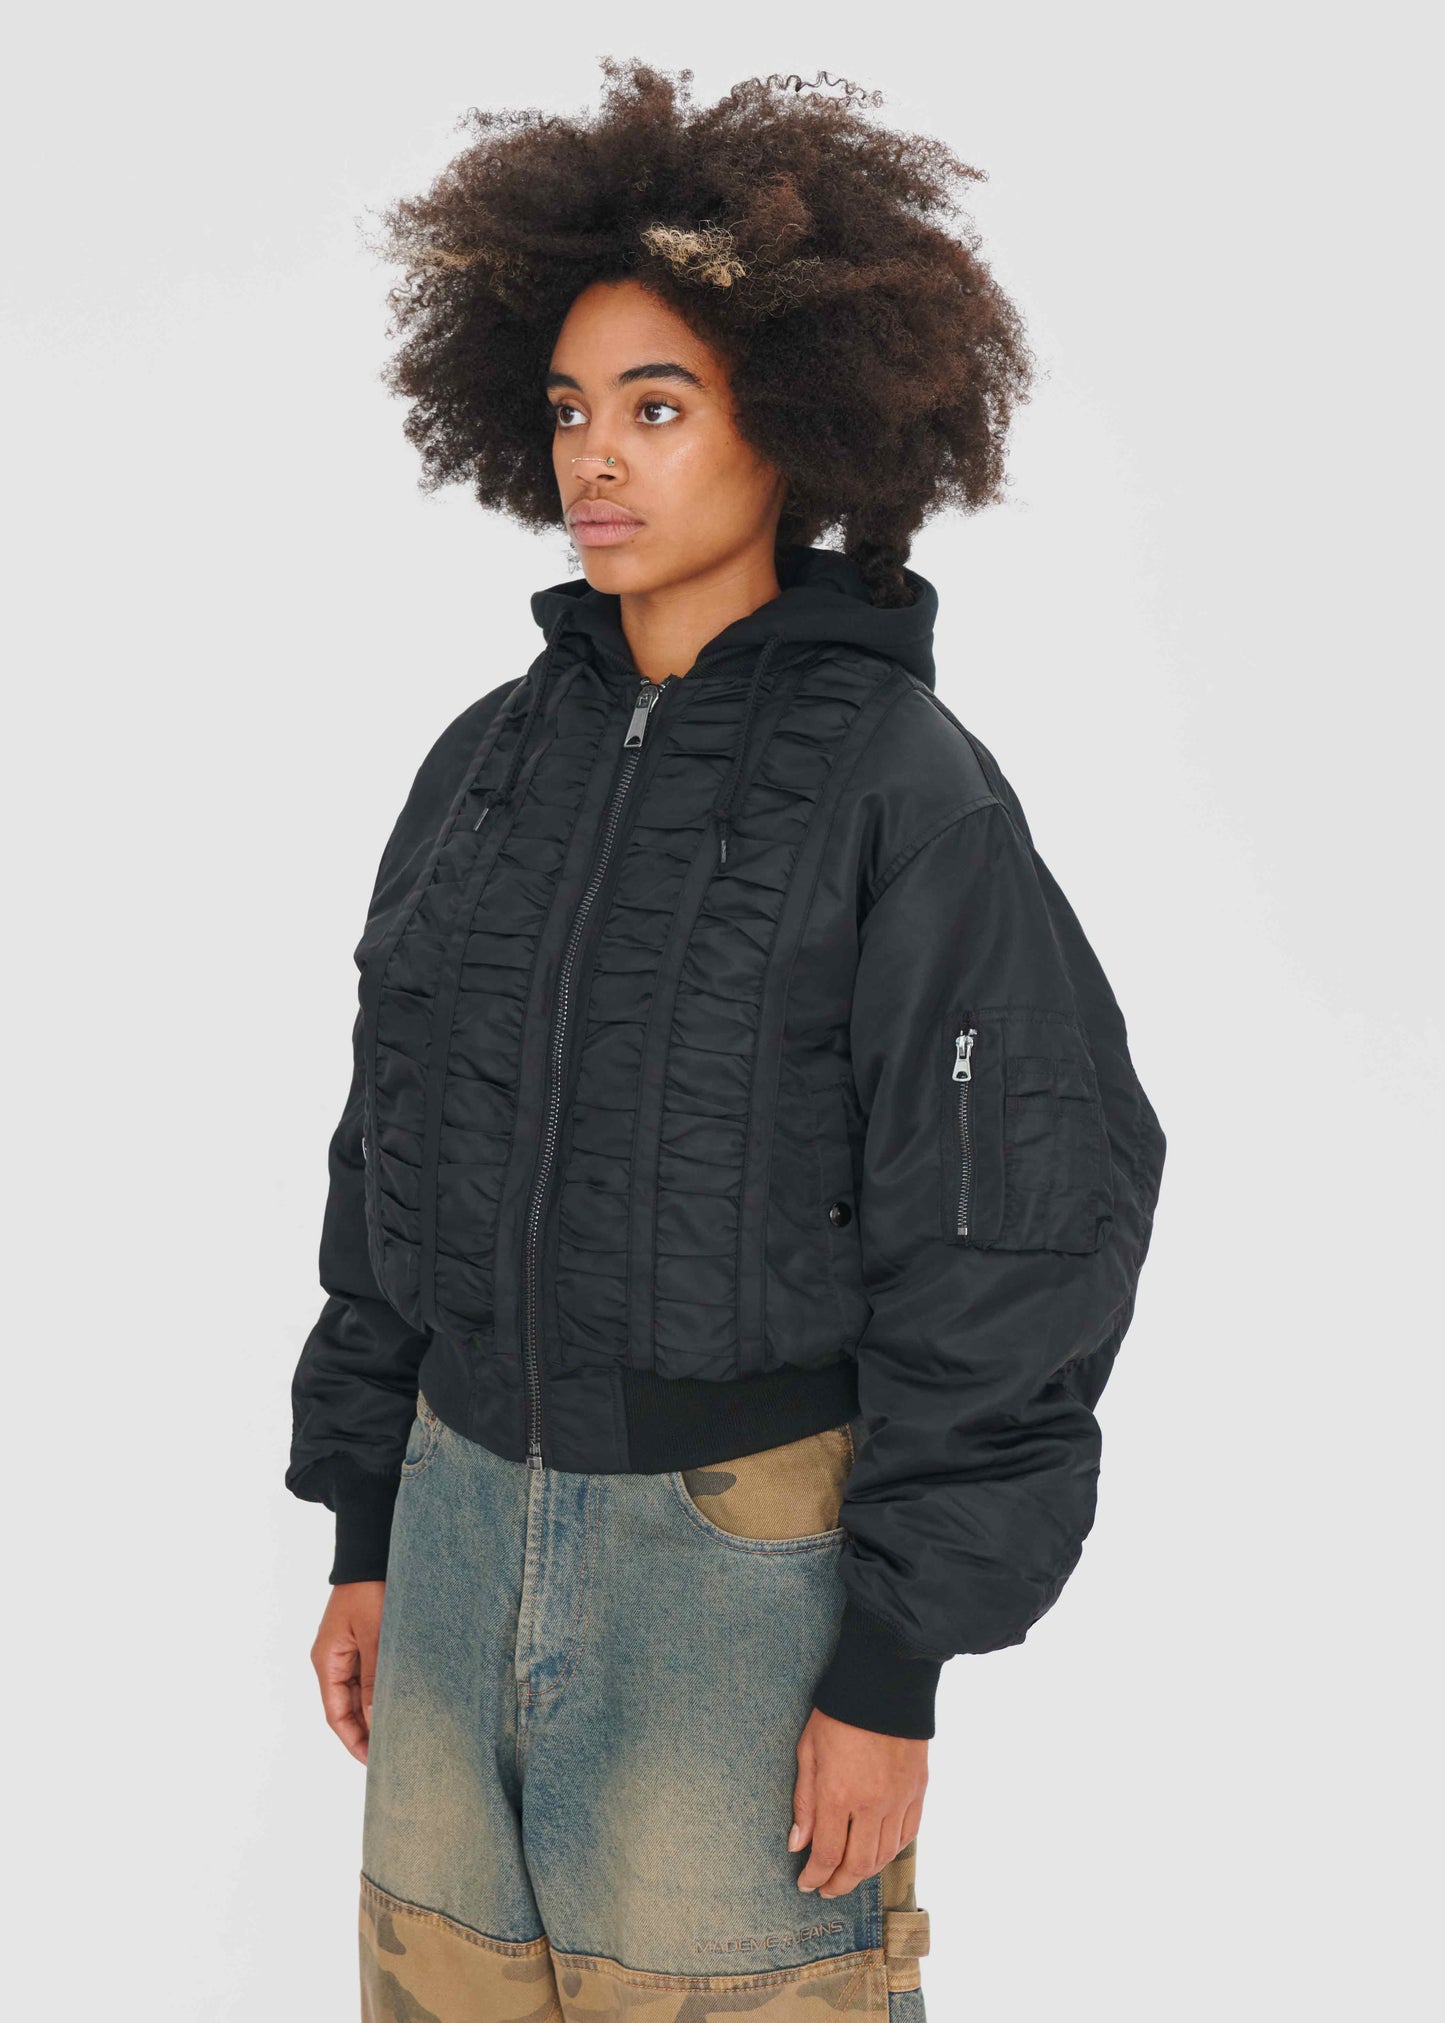 MADEME®/ALPHA INDUSTRIES® RUCHED MA-1 BOMBER